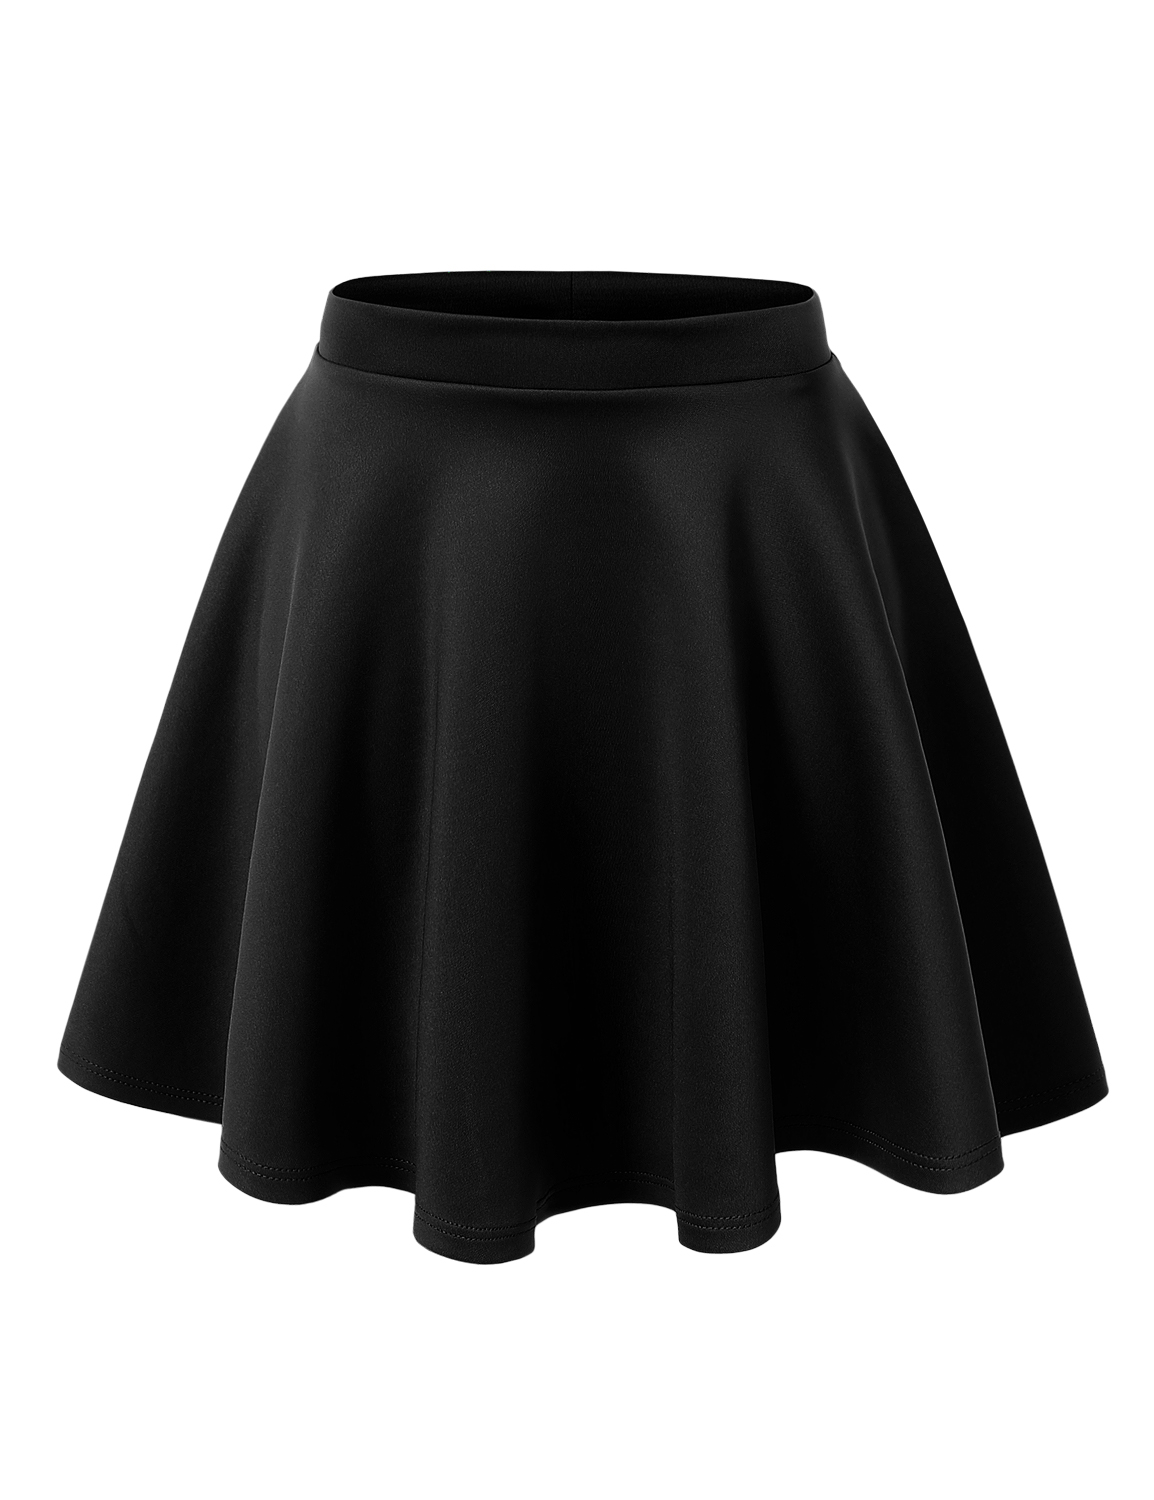 A.S Made in USA Womens Basic Versatile Stretchy Flared Skater Skirt